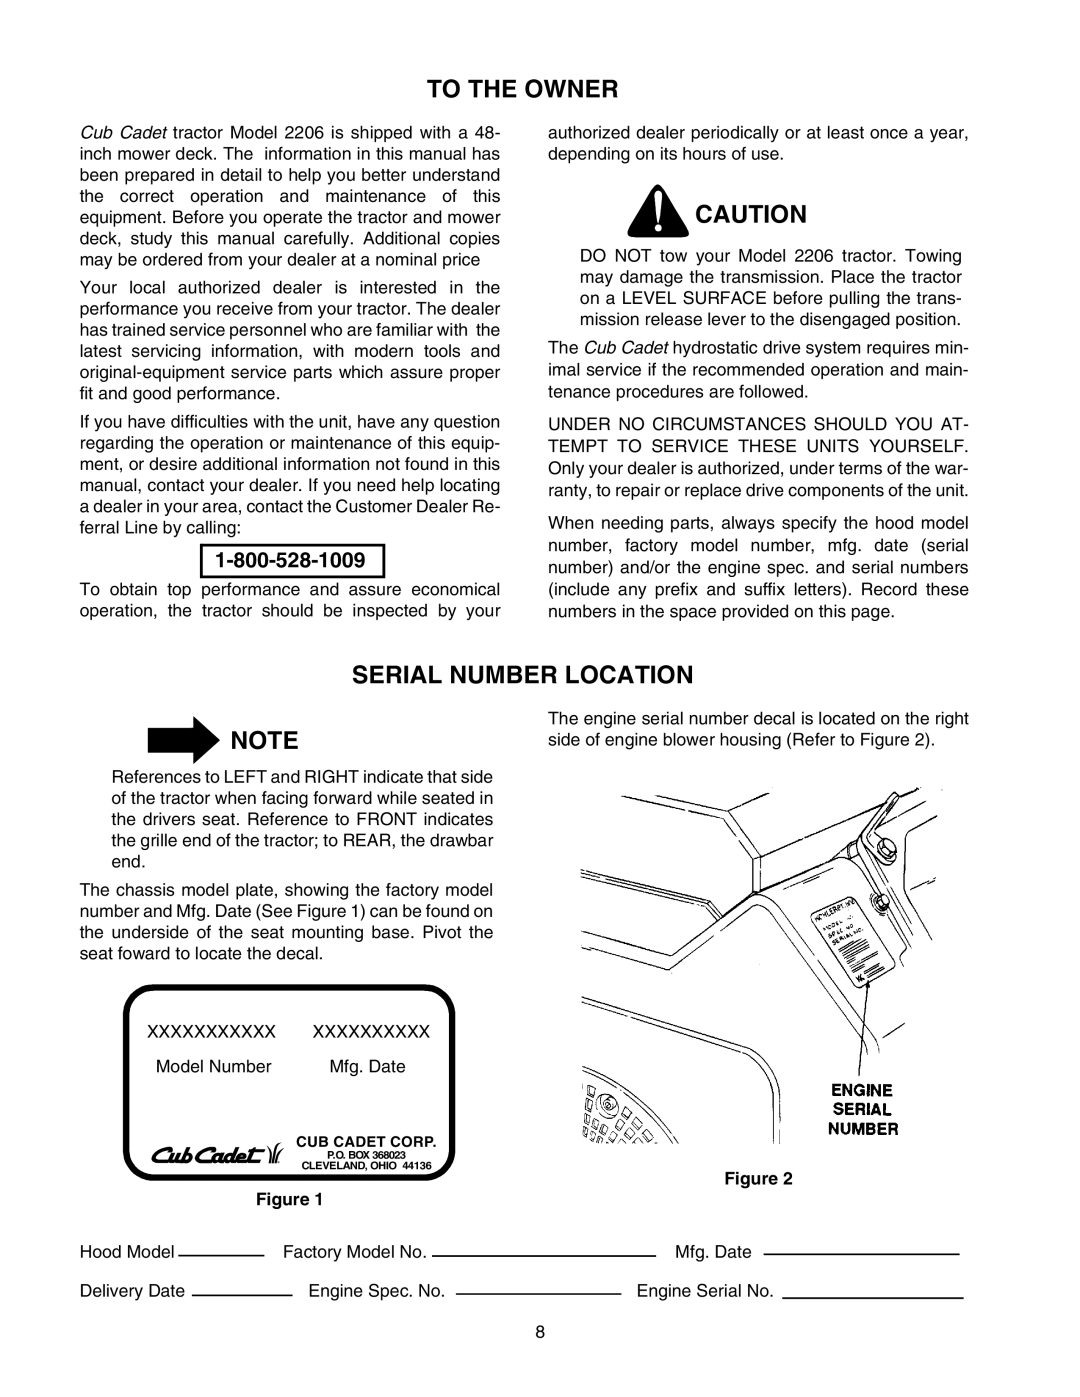 Cub Cadet 2206 manual To the Owner, Serial Number Location 